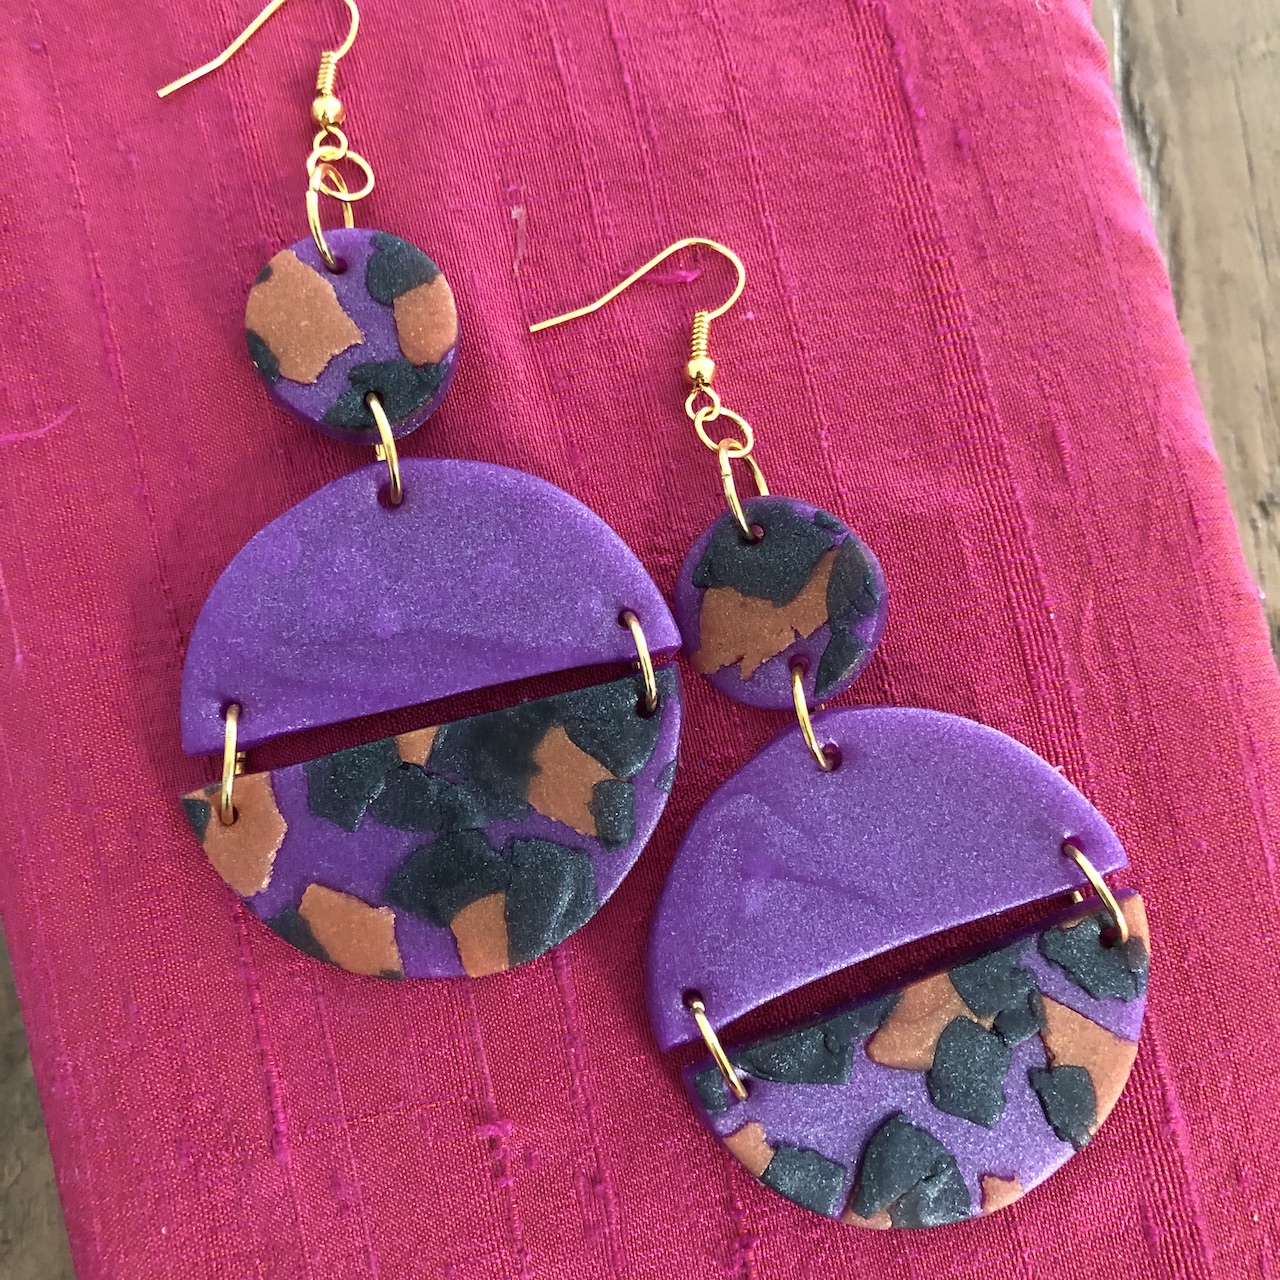 How to Make Polymer Clay Slabs with Sculpey Soufflé, plus Ideas for Scrap  Slab Clay Pendants Jewelry - CATHIE FILIAN's Handmade Happy Hour